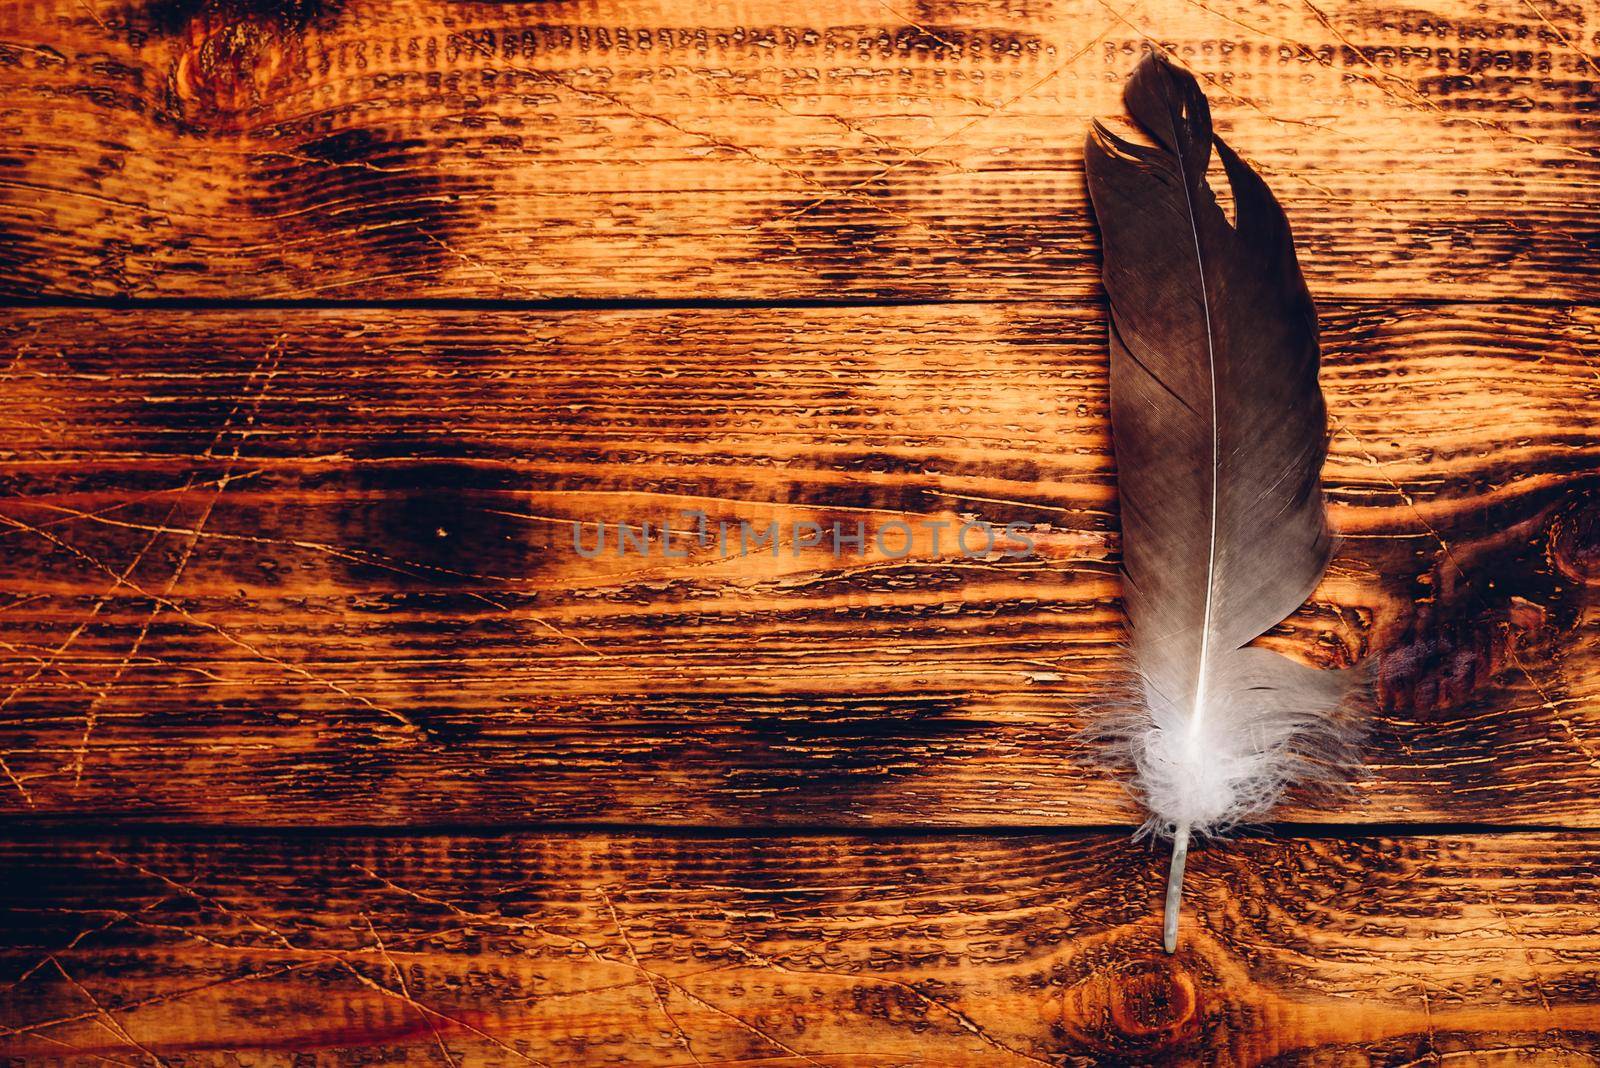 Hawk feather over old wooden table. Copy space